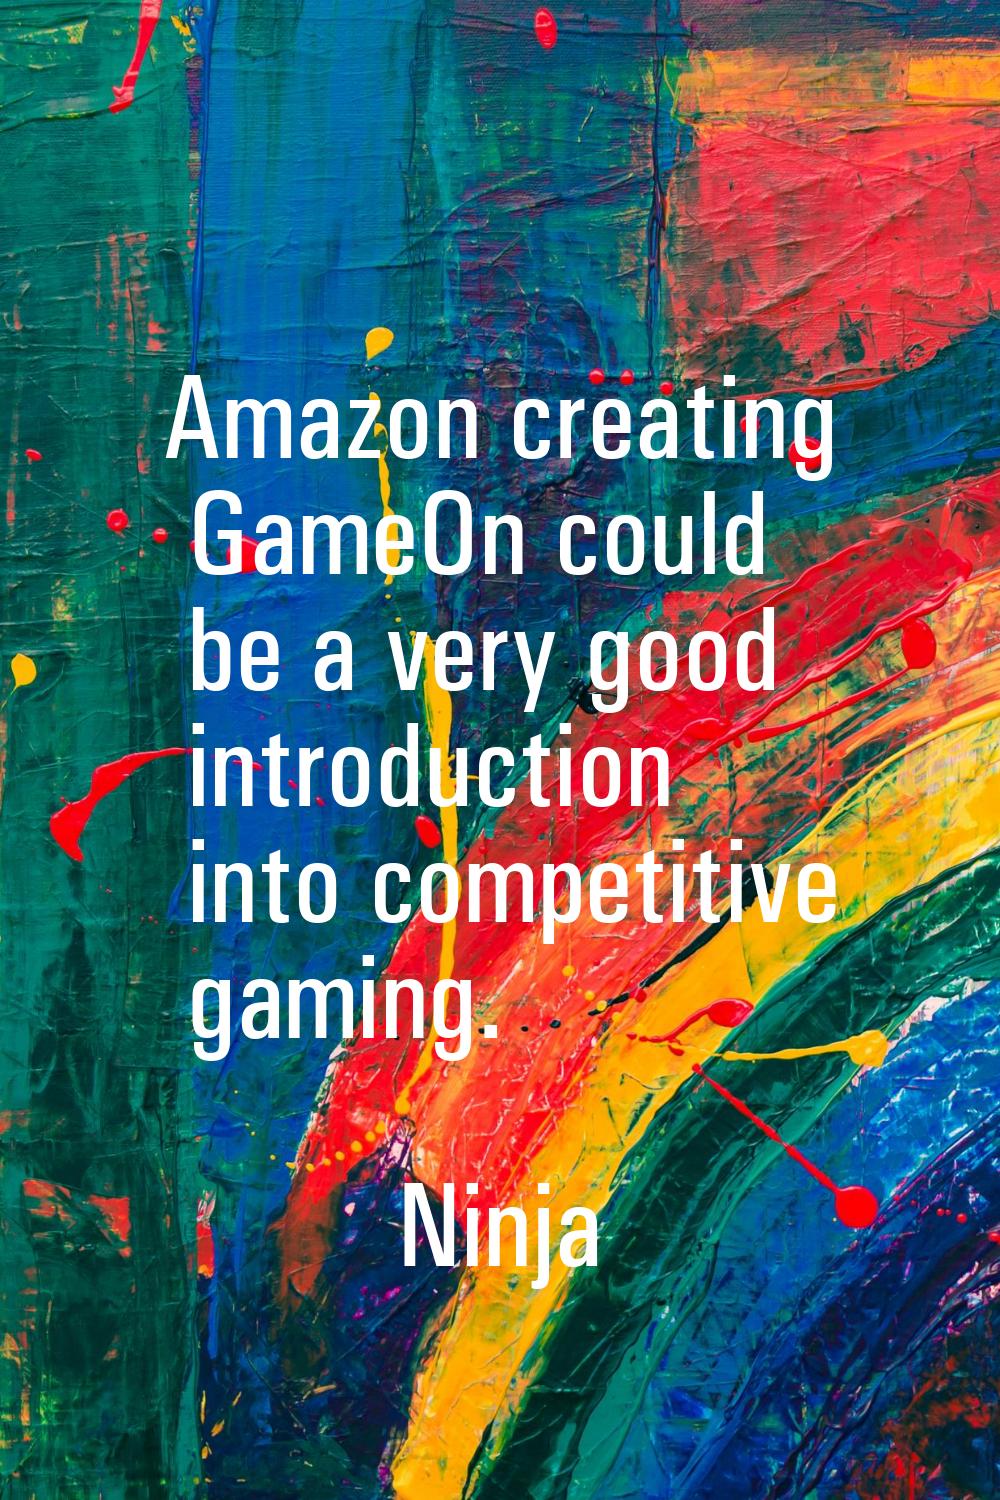 Amazon creating GameOn could be a very good introduction into competitive gaming.